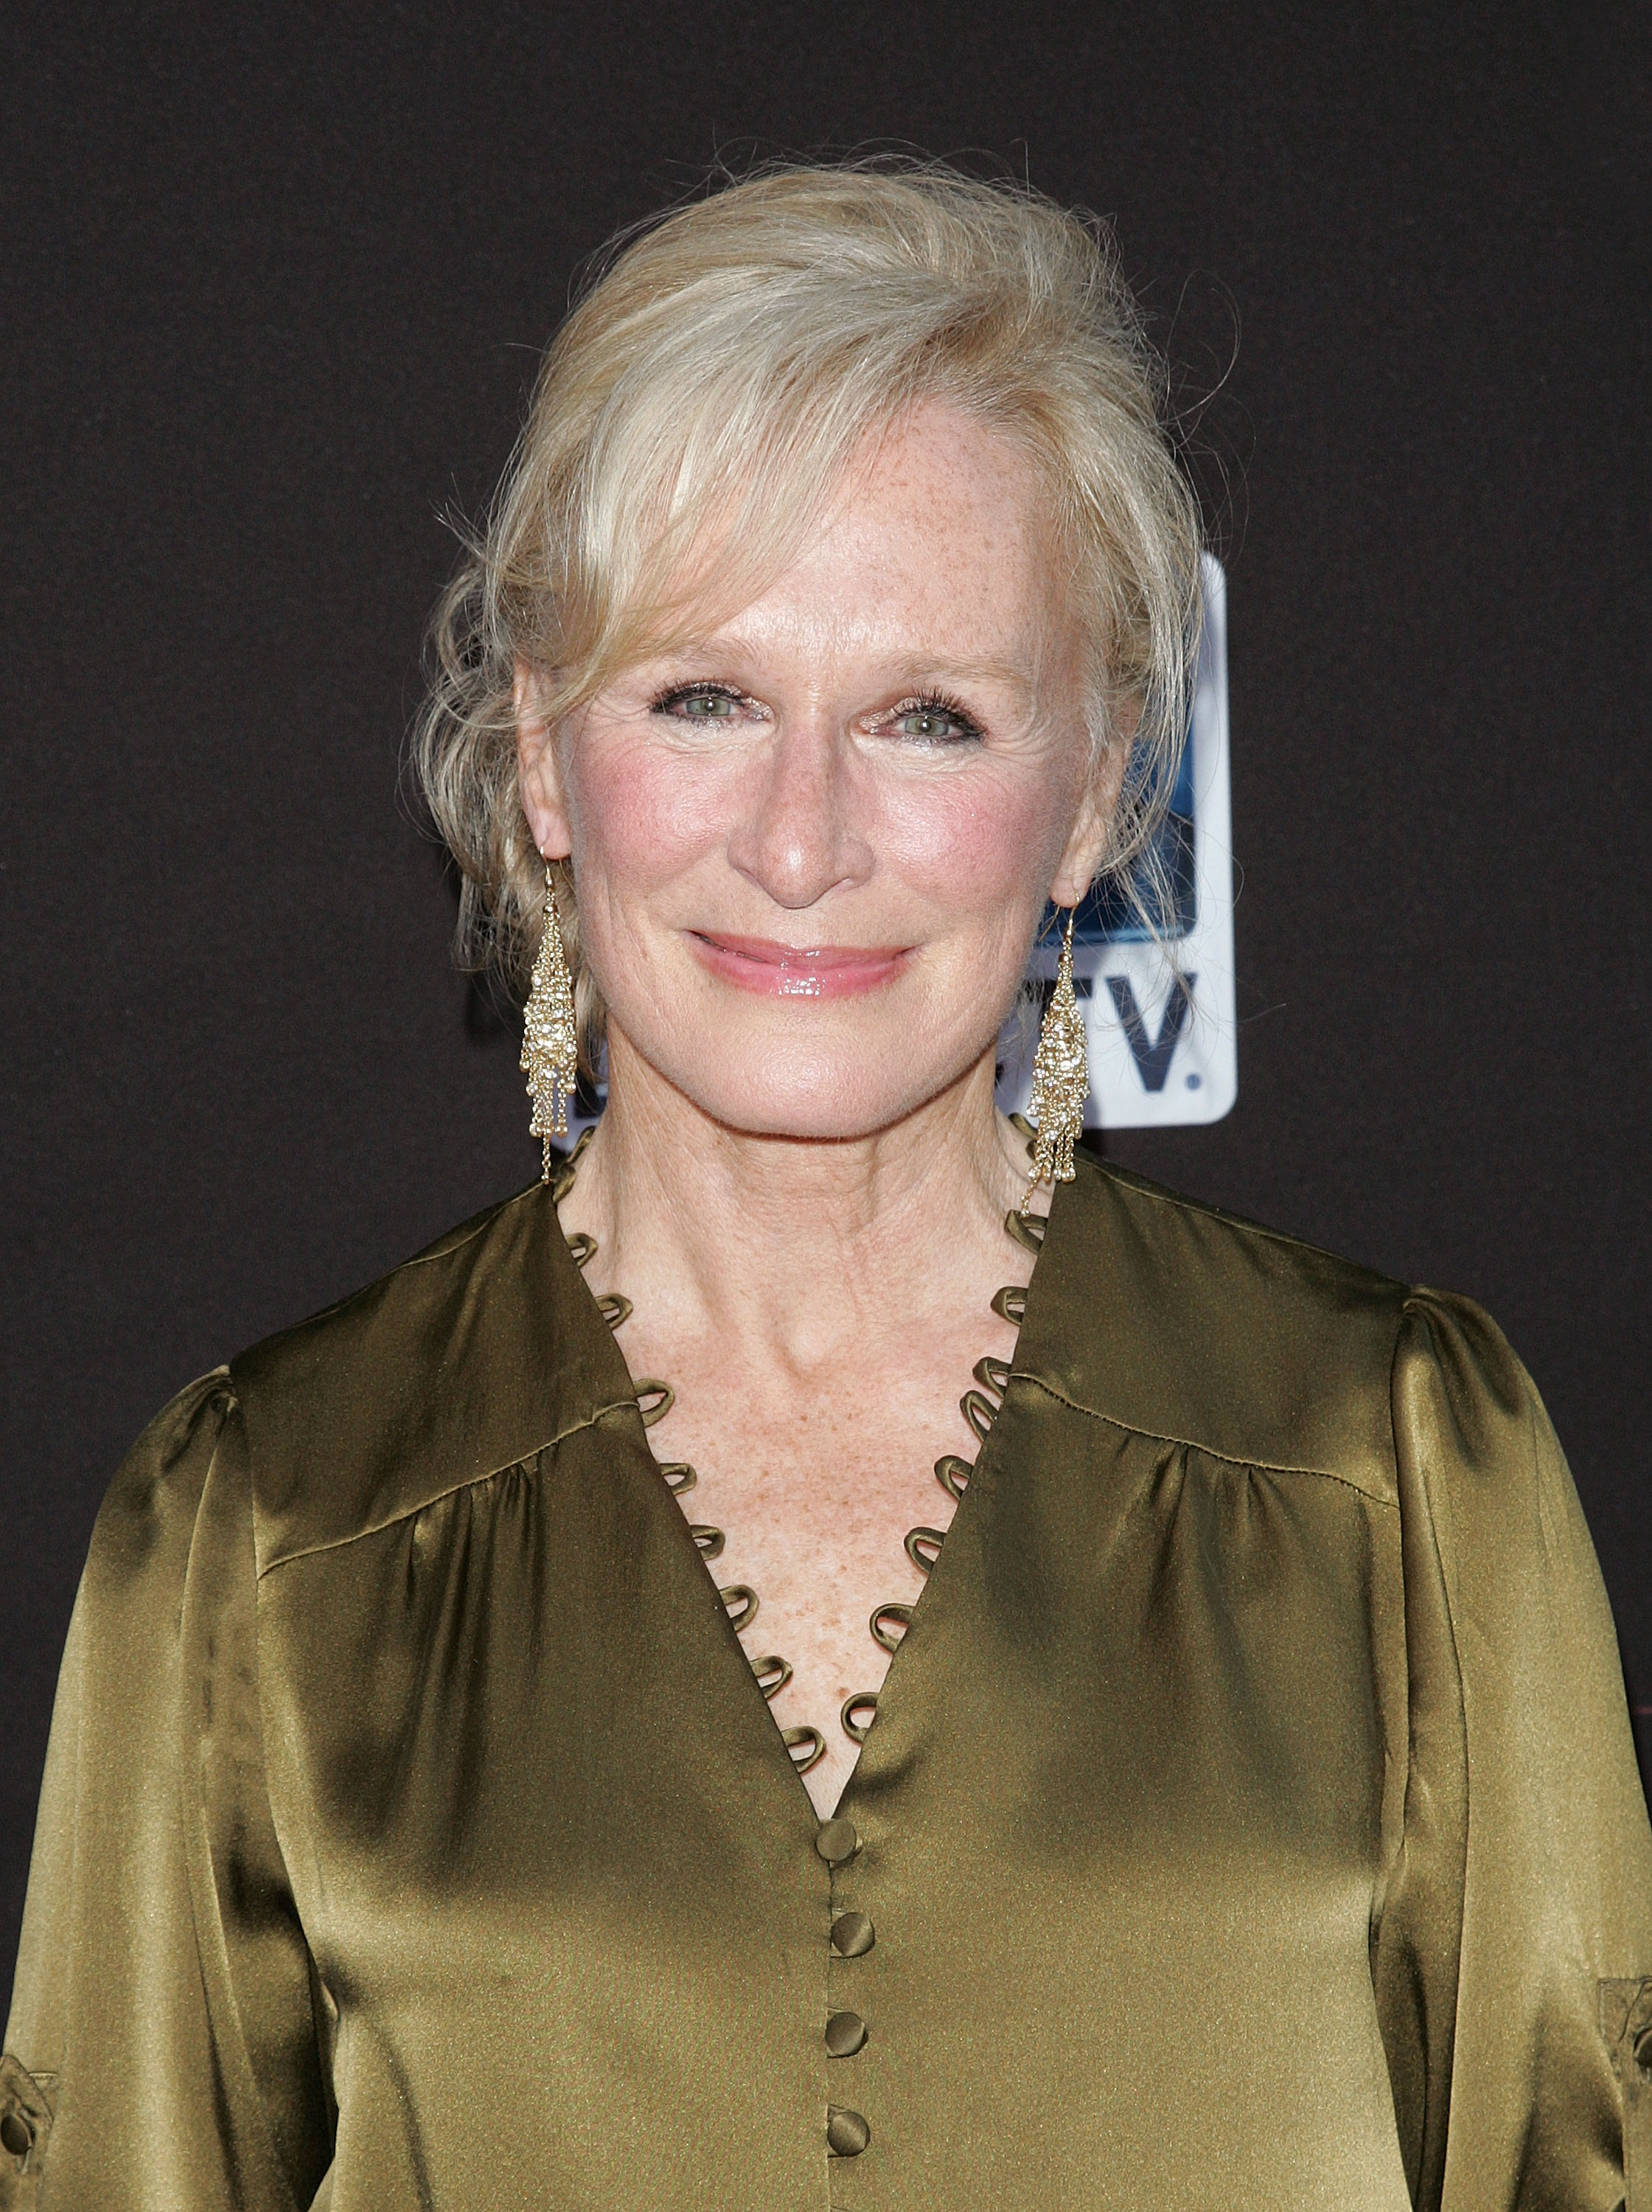 Glenn Close at the "Damages" season 4 premiere at the Paris Theatre on June 29, 2011, in New York City | Source: Getty Images